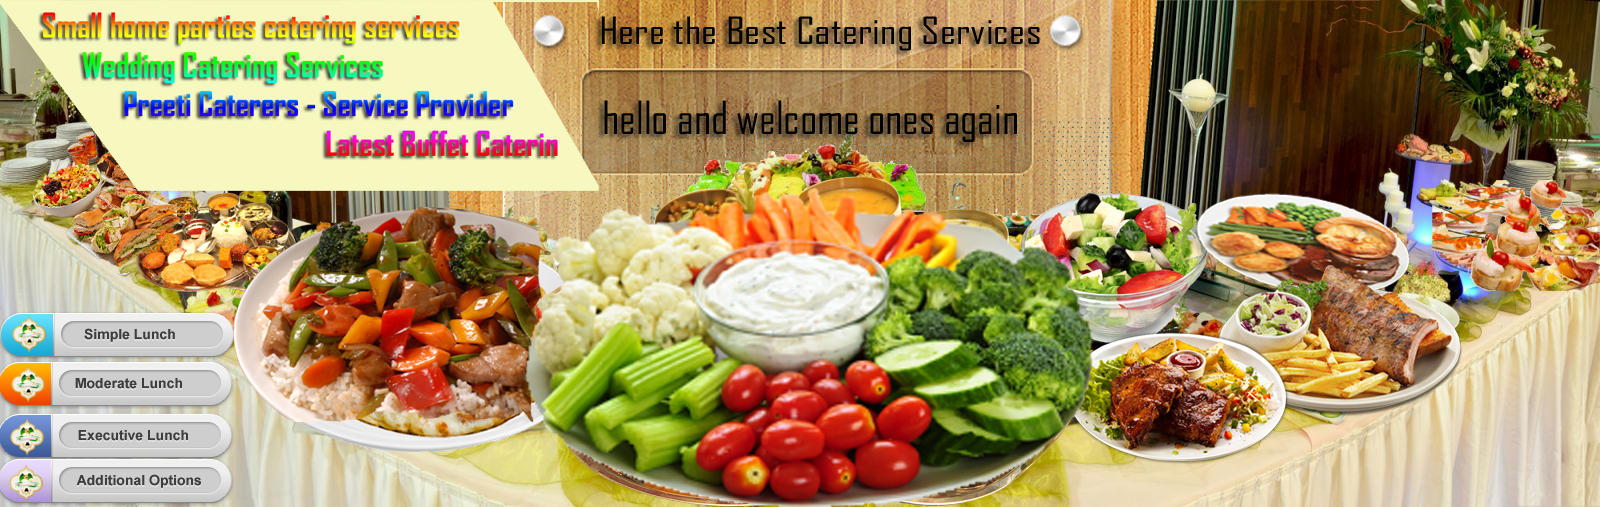 Best Catering Services in Cooking Expert Namakkal, Caterers India-